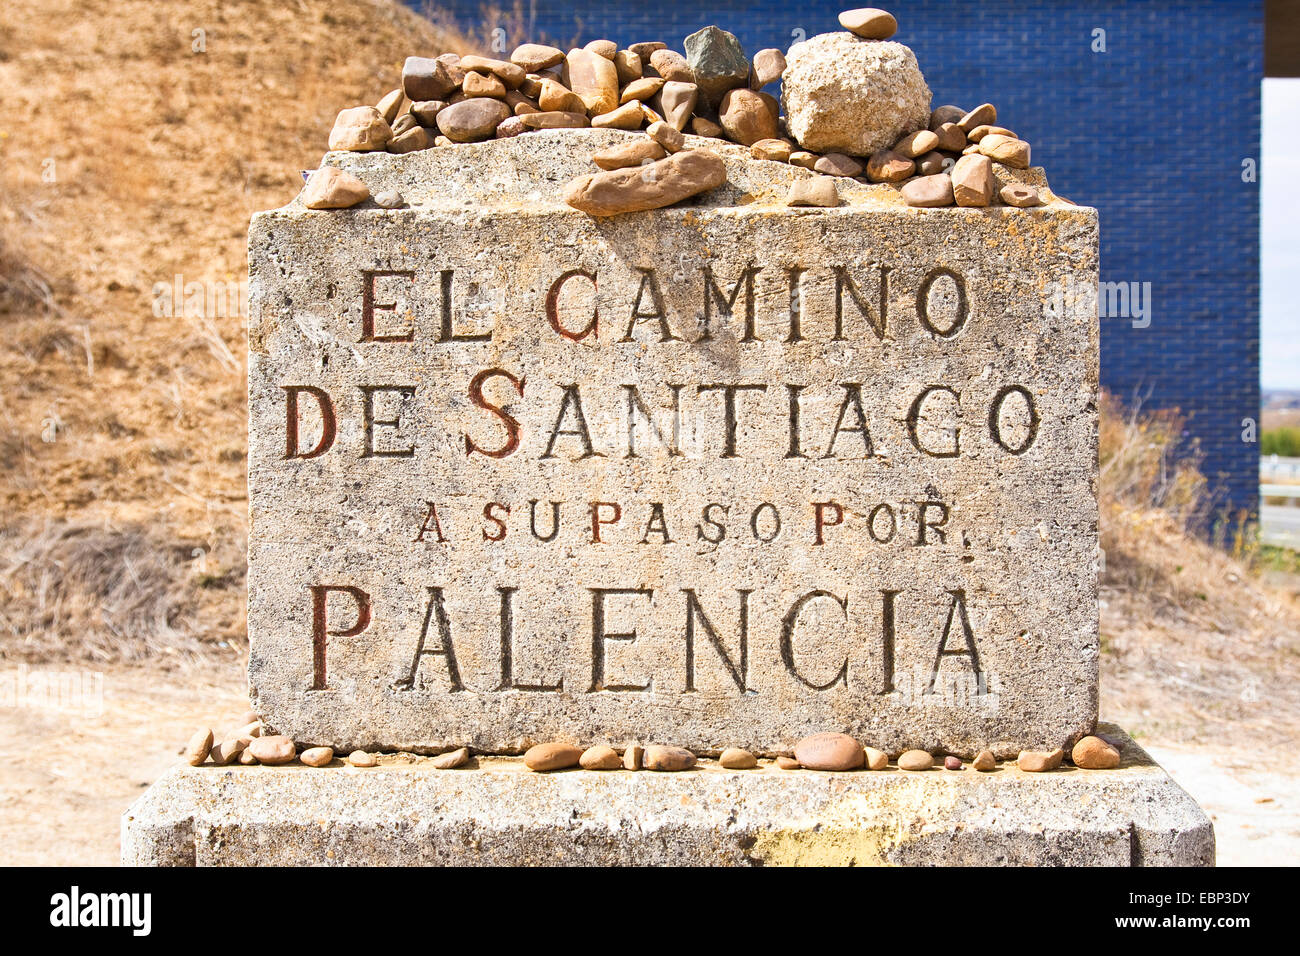 Way of St. James, borderstone between the provinces Palencia and Le¾n on the way from San Nicolßs del Real Camino to Sahag·n, Spain, Castile and Leon, Palencia Stock Photo